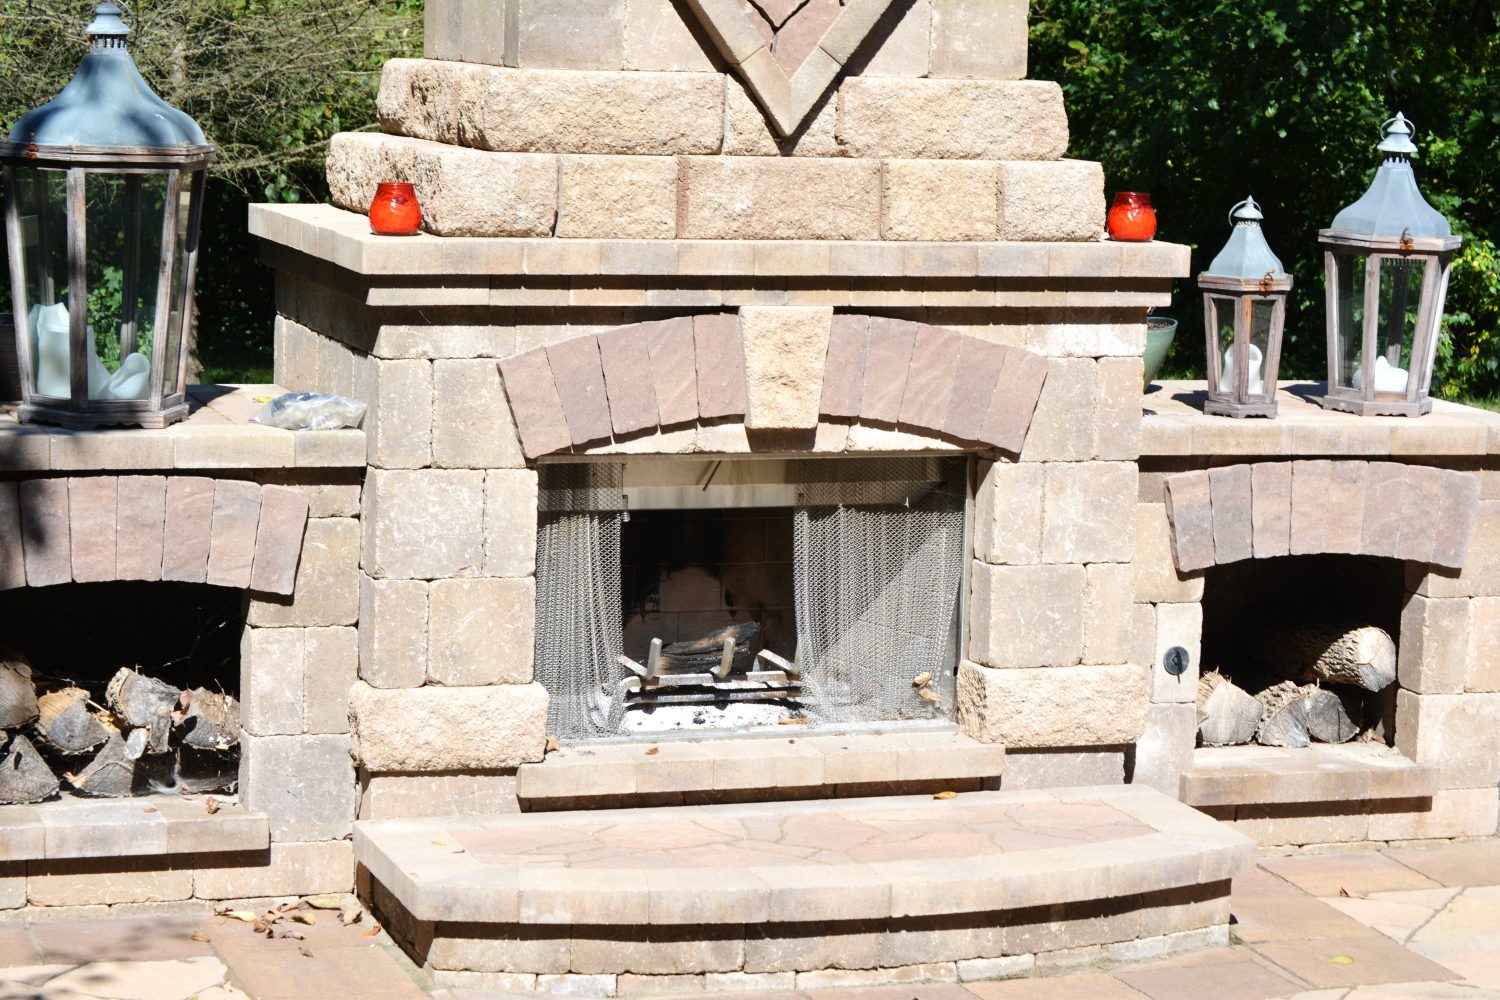 Bricked outdoor fireplace and lighting ornaments